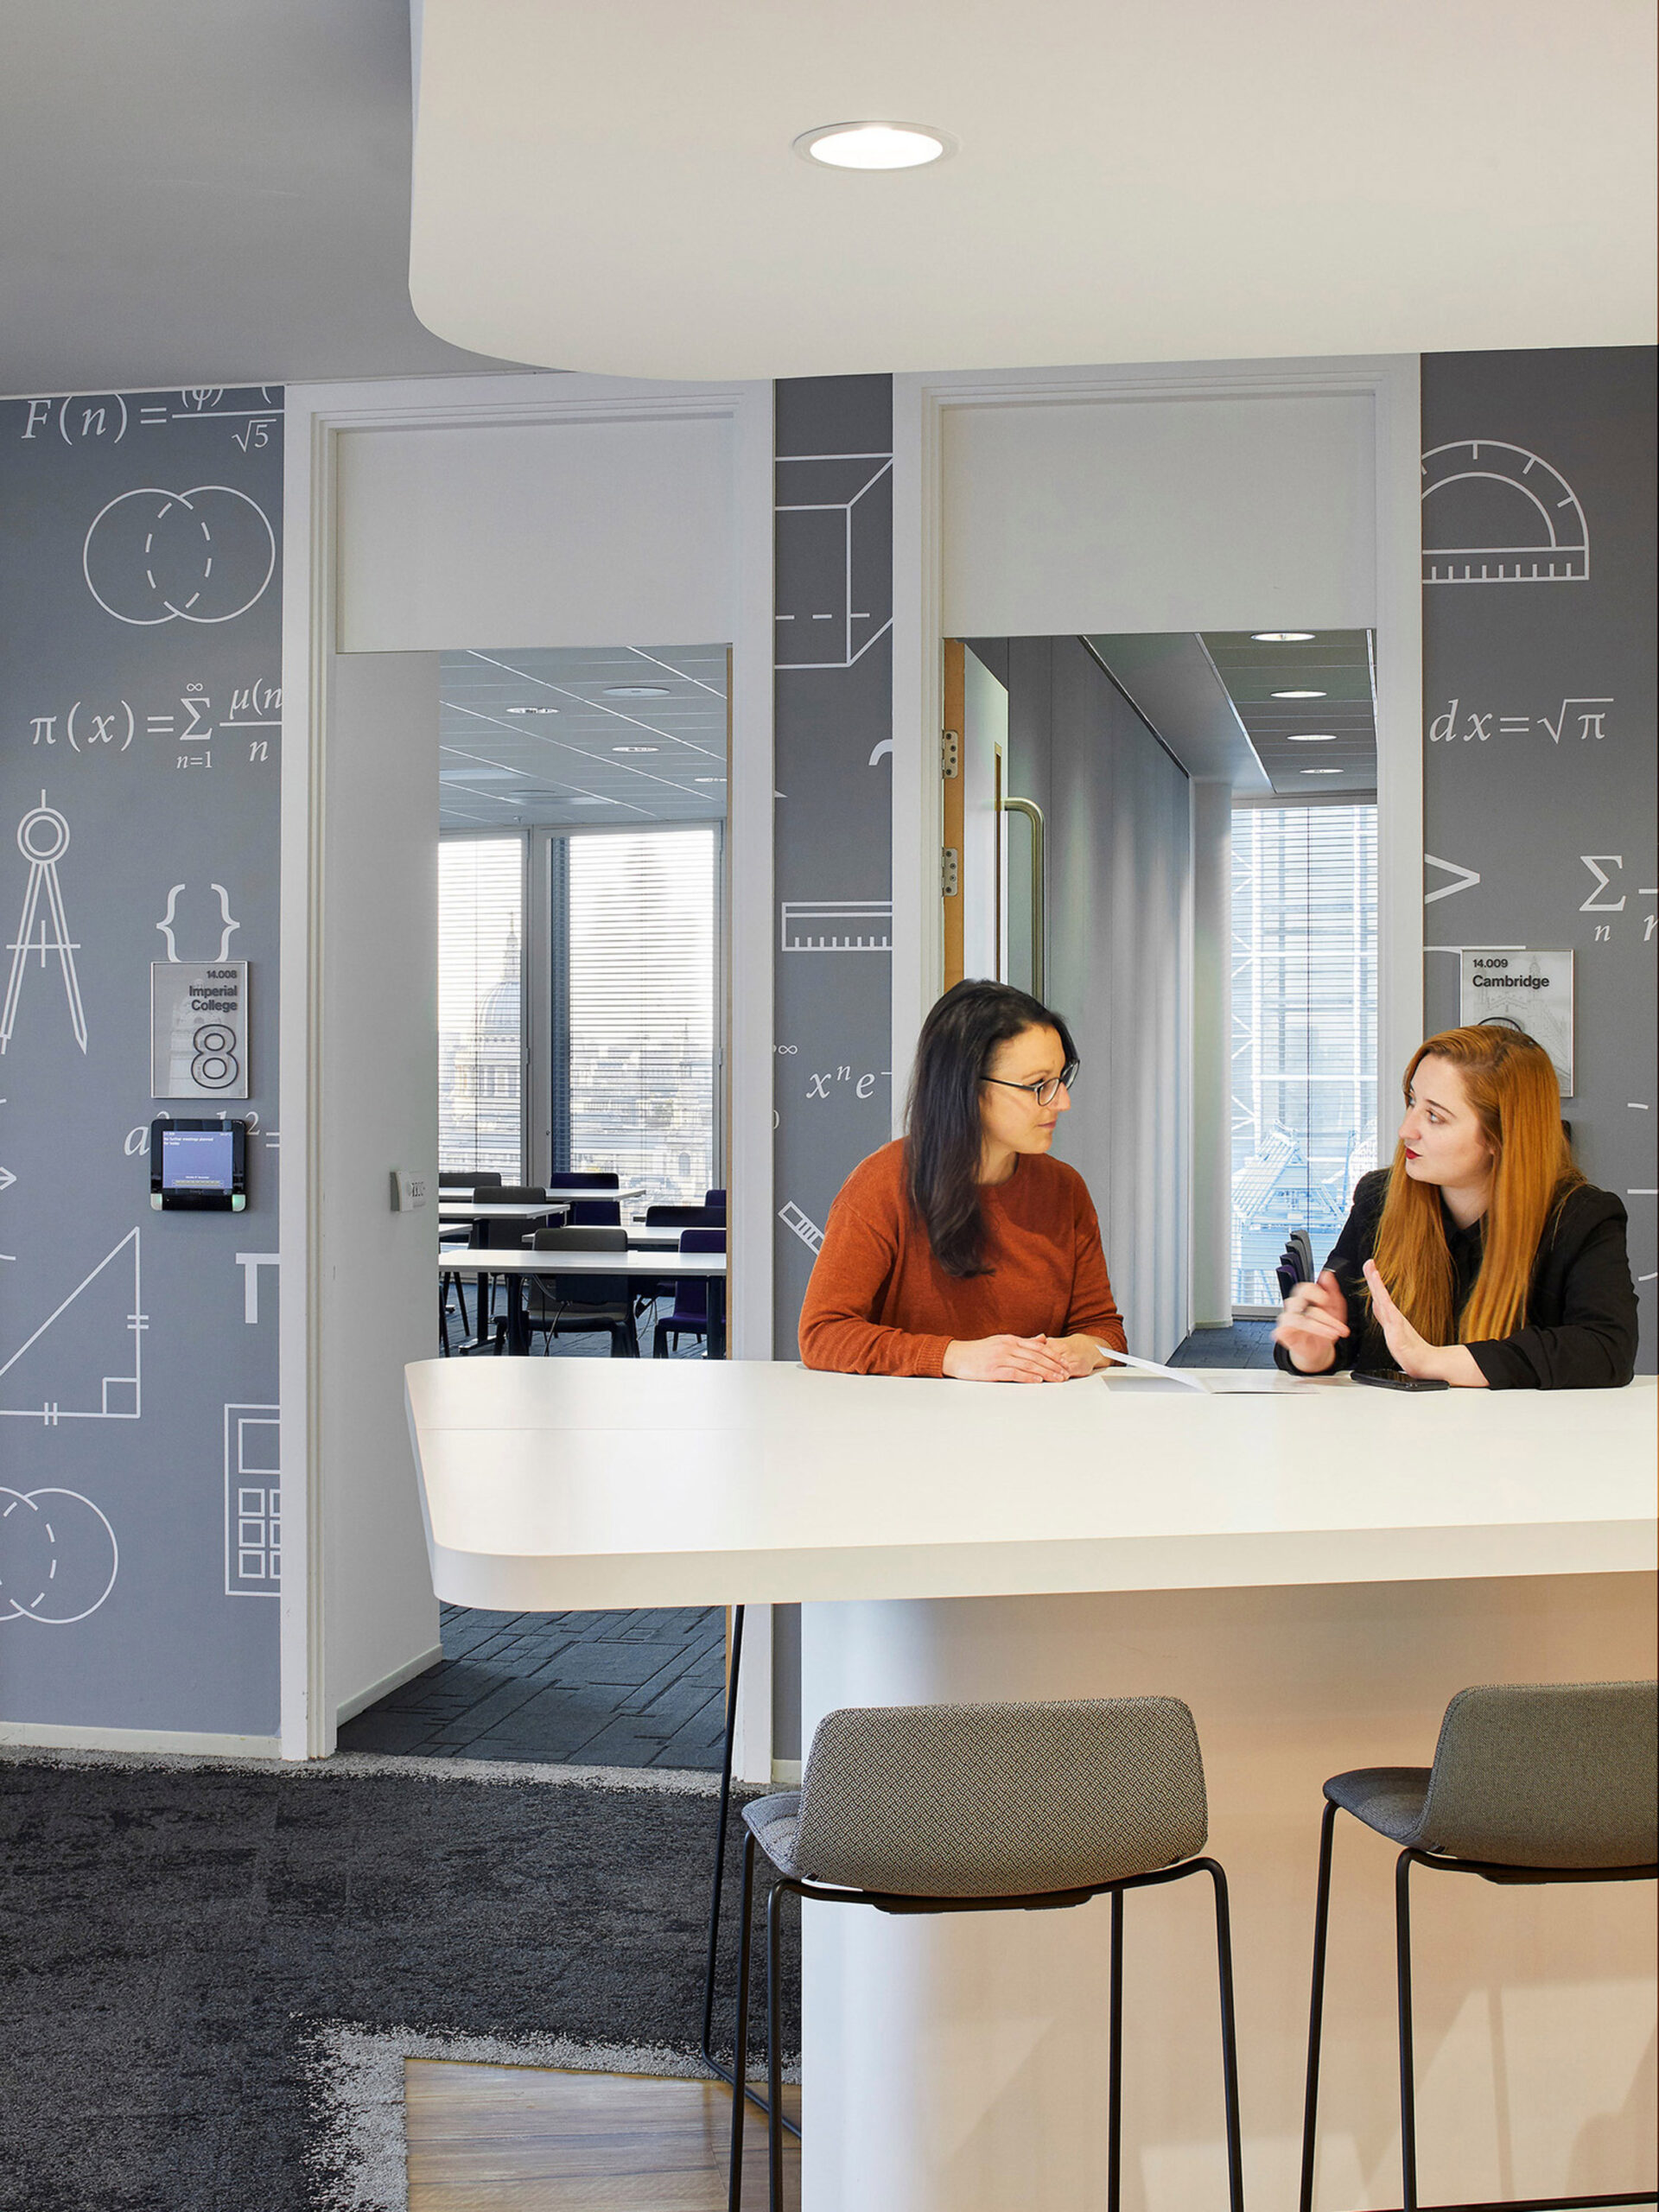 A contemporary office break room, featuring charcoal gray flooring, sleek white cabinetry, and a geometric-patterned accent wall with mathematical illustrations. Two professionals engage in conversation at a minimalist table with functional seating, illuminated by natural light from adjacent windows.